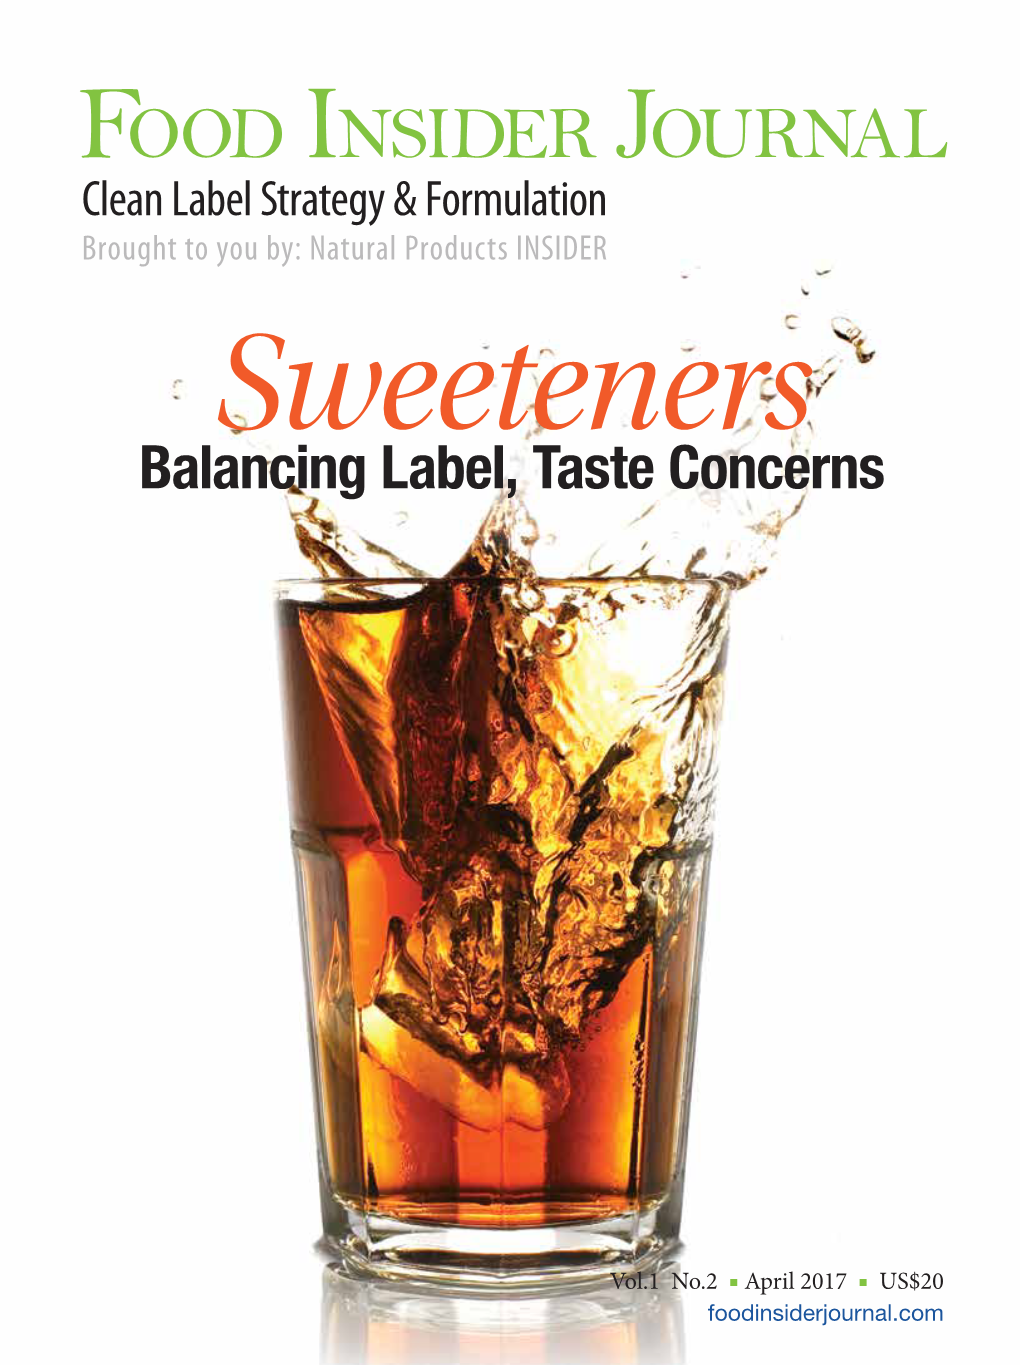 Food Insider Journal Clean Label Strategy & Formulation Brought to You By: Natural Products INSIDER Sweeteners Balancing Label, Taste Concerns